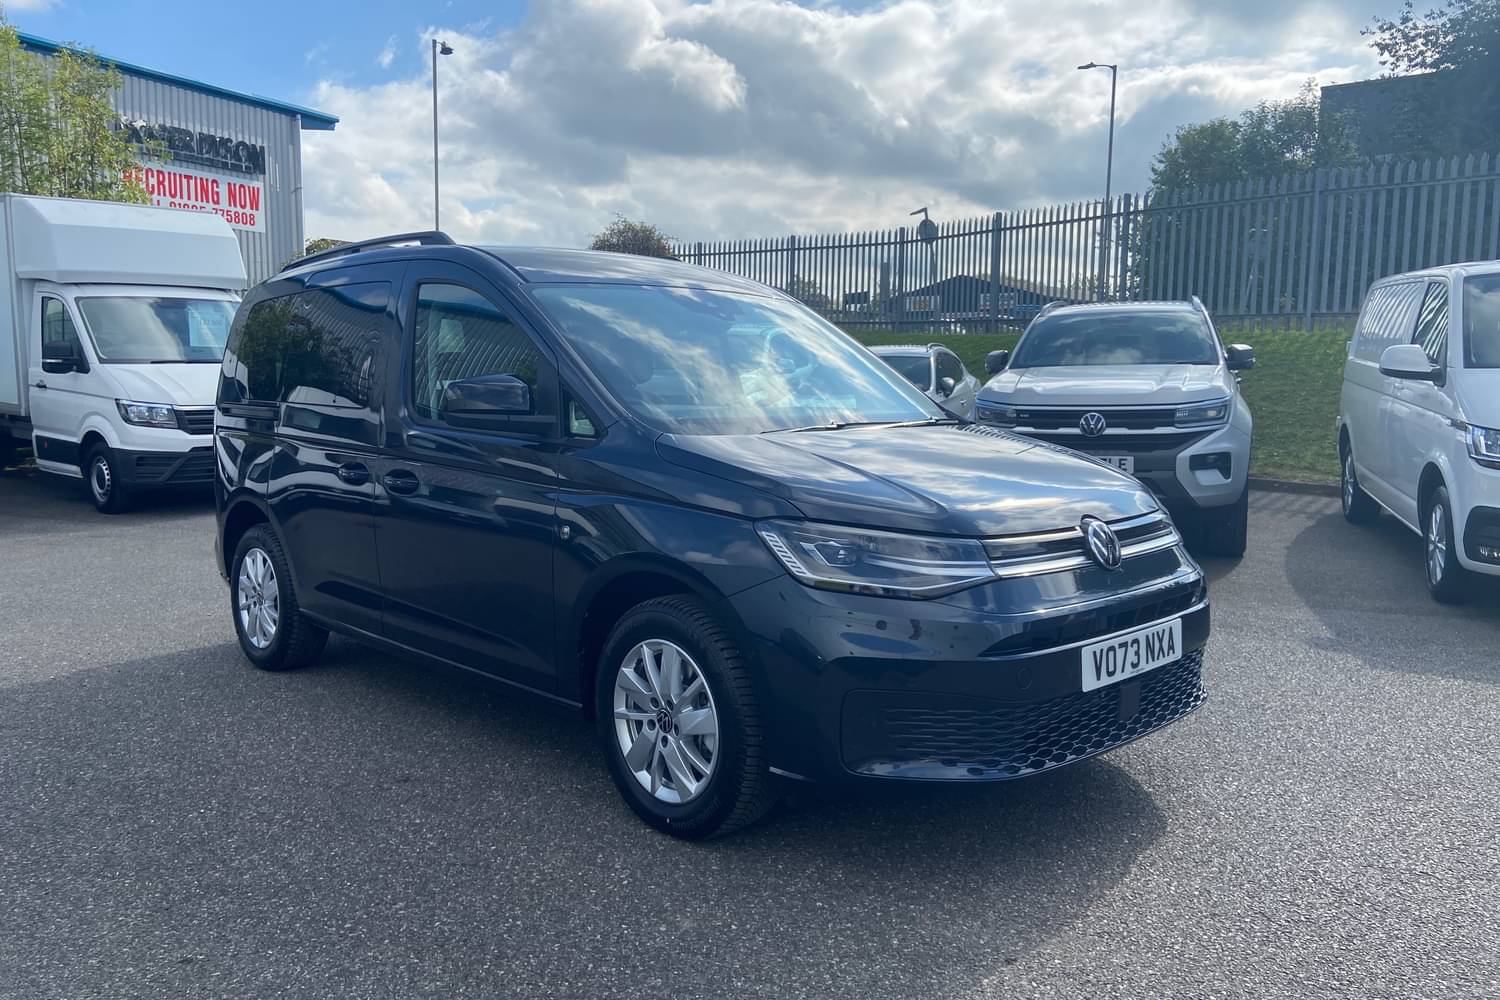 Used Volkswagen Caddy Maxi for sale - Listers